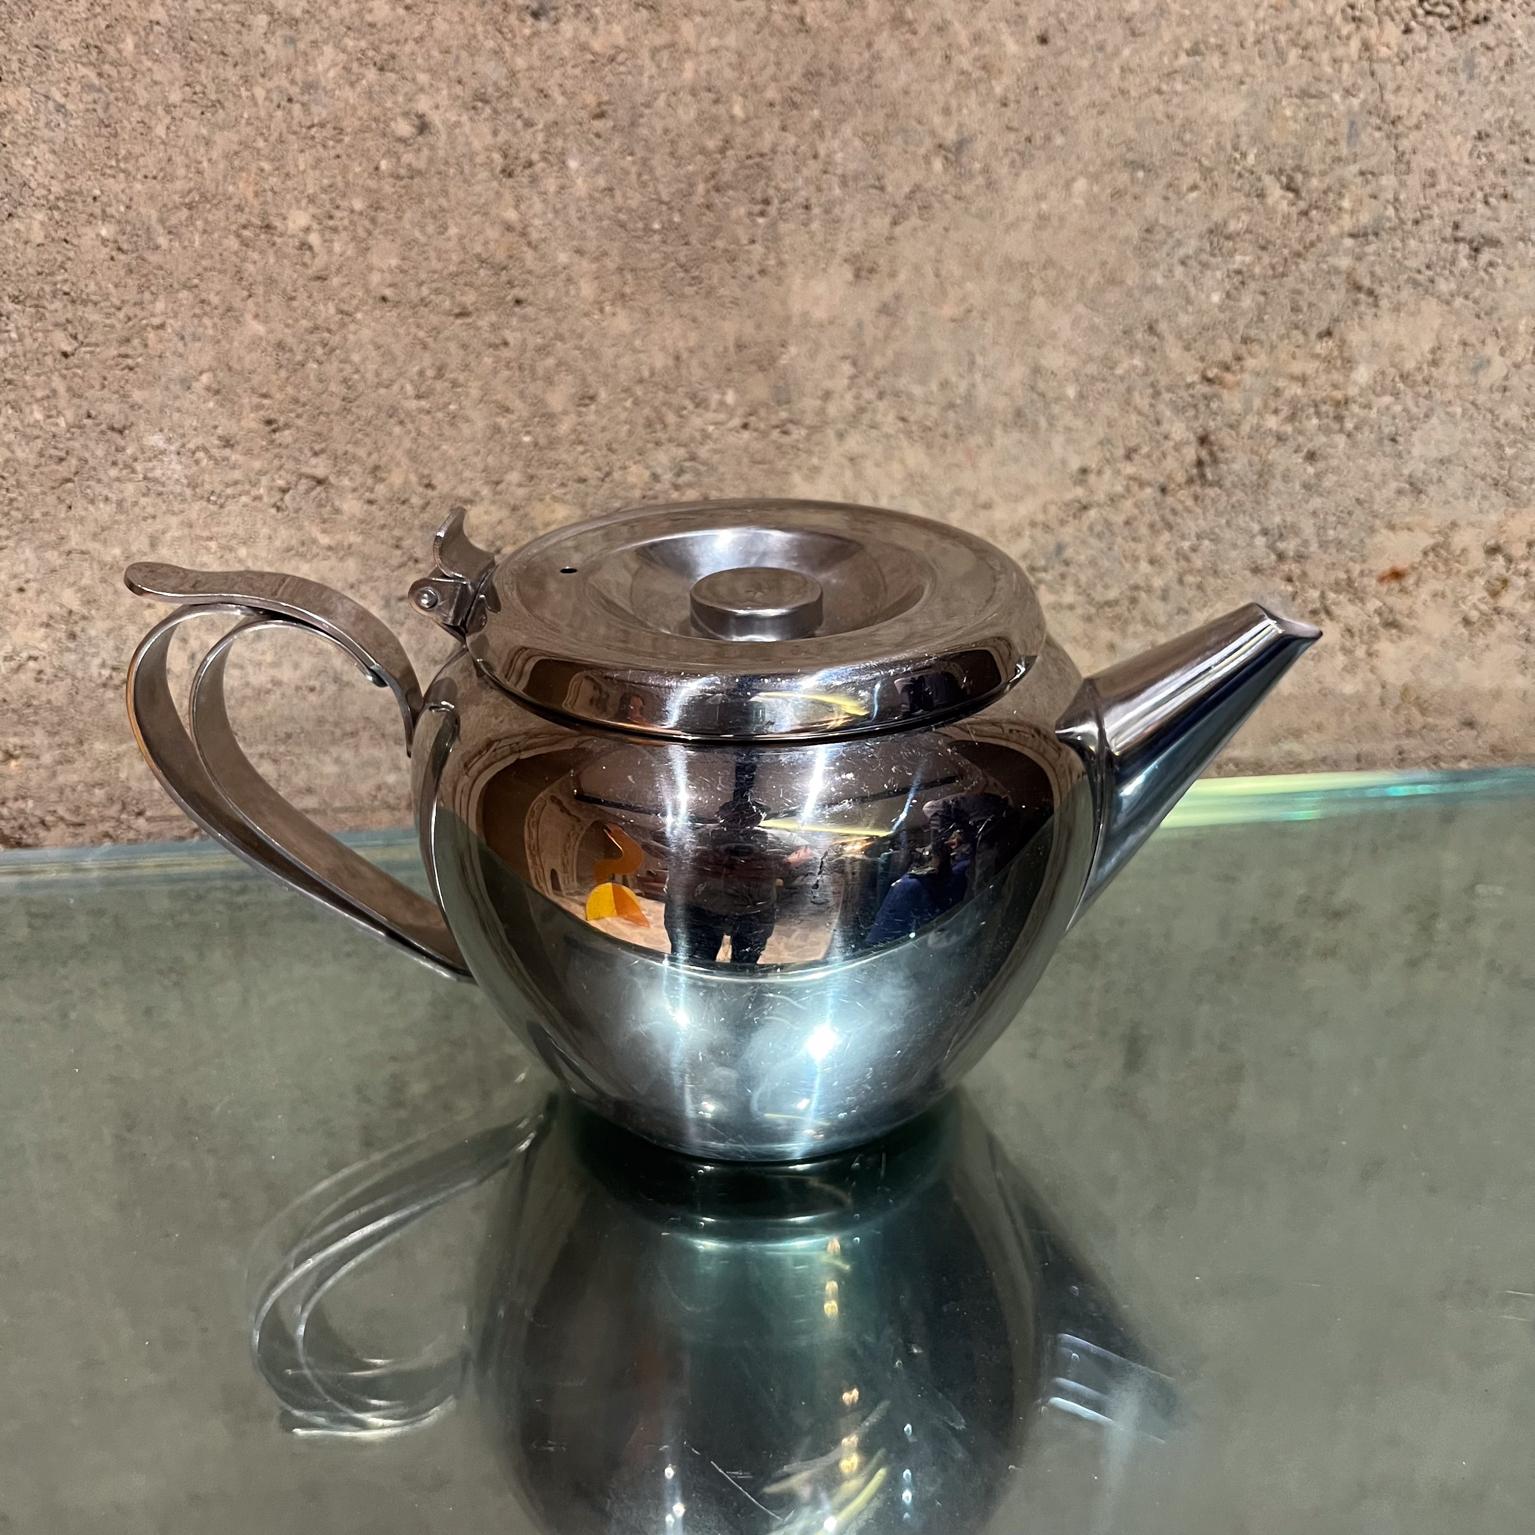 1960s Vintage Sunnex Tea Pot Hong Kong
maker stamped
Stainless Steel
4.5 h x 8.75 d x 5 w
made in Hong Kong
Preowned original vintage condition unrestored.
See all images provided.

